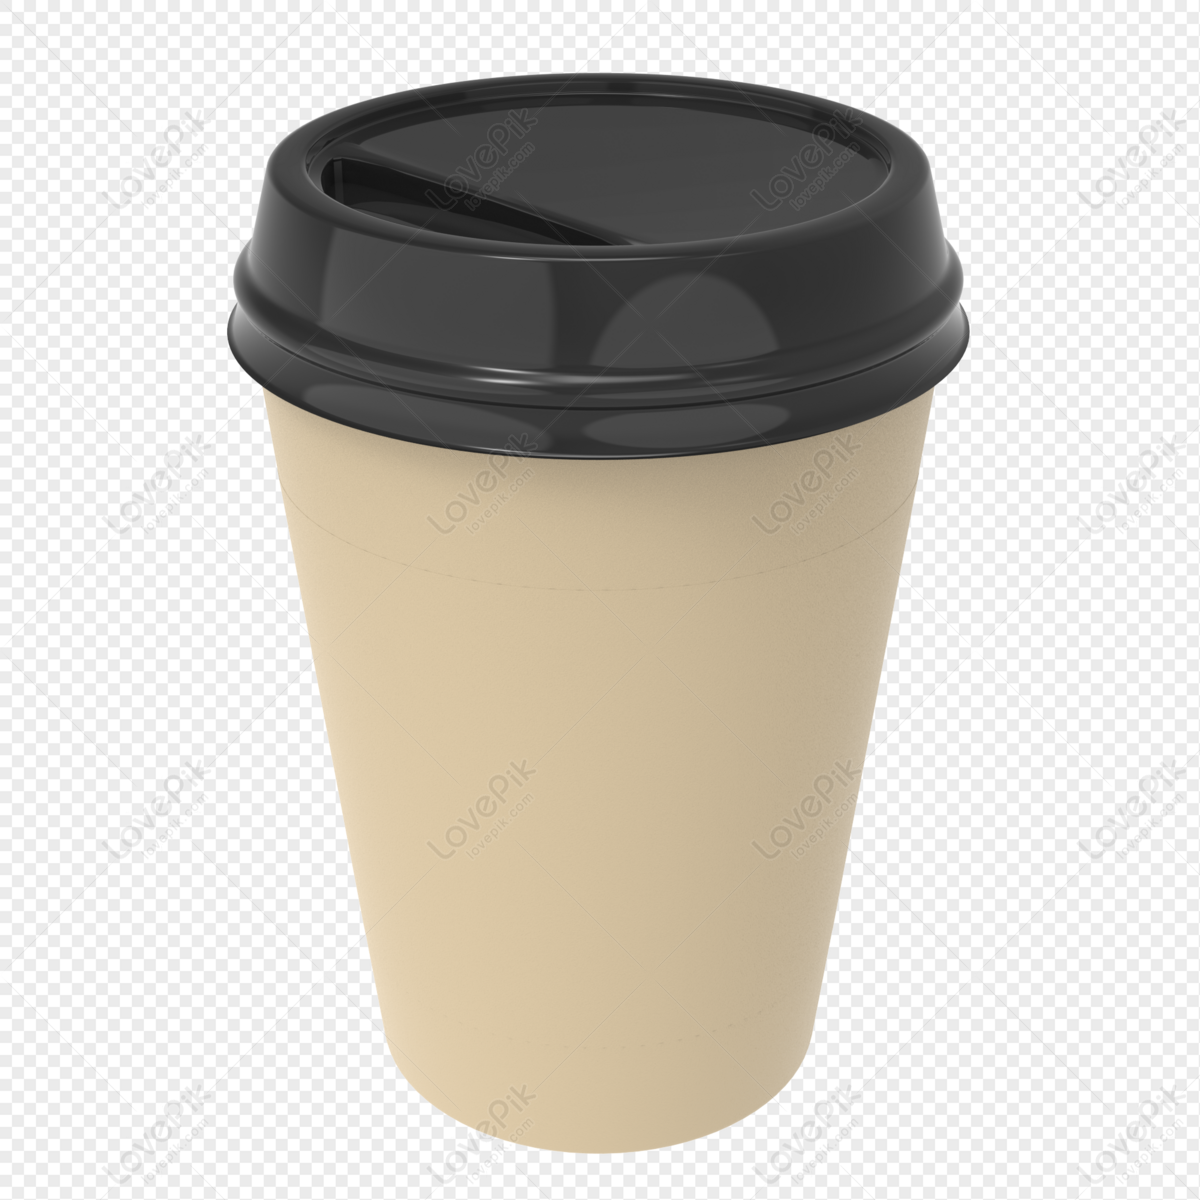 https://img.lovepik.com/free-png/20220127/lovepik-coffee-cup-3d-model-png-image_401944205_wh1200.png